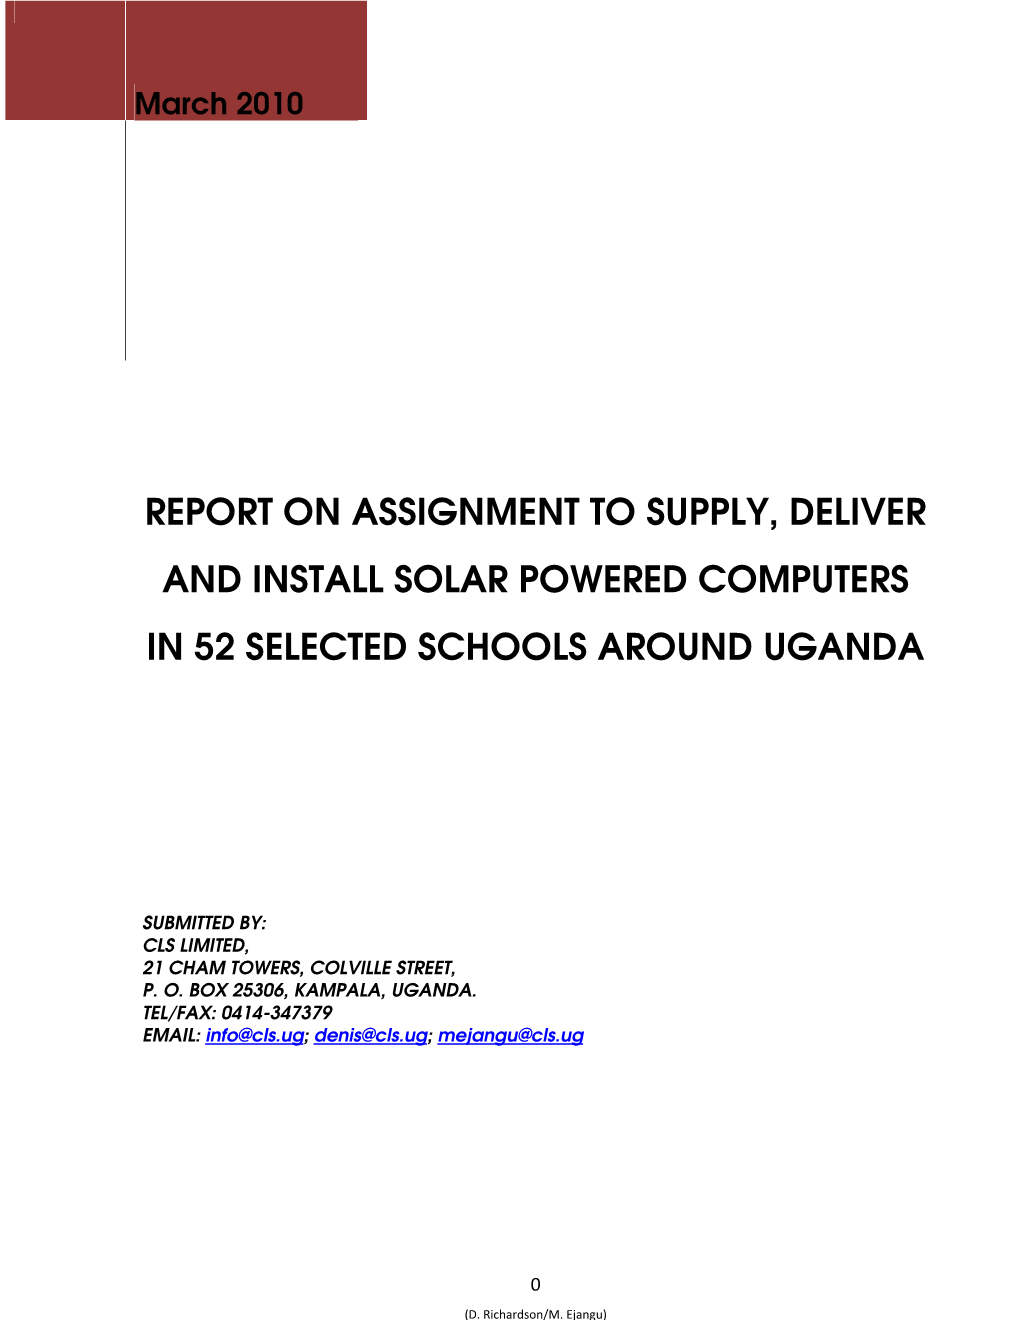 Report on Assignment to Supply, Deliver and Install Solar Powered Computers in 52 Selected Schools Around Uganda